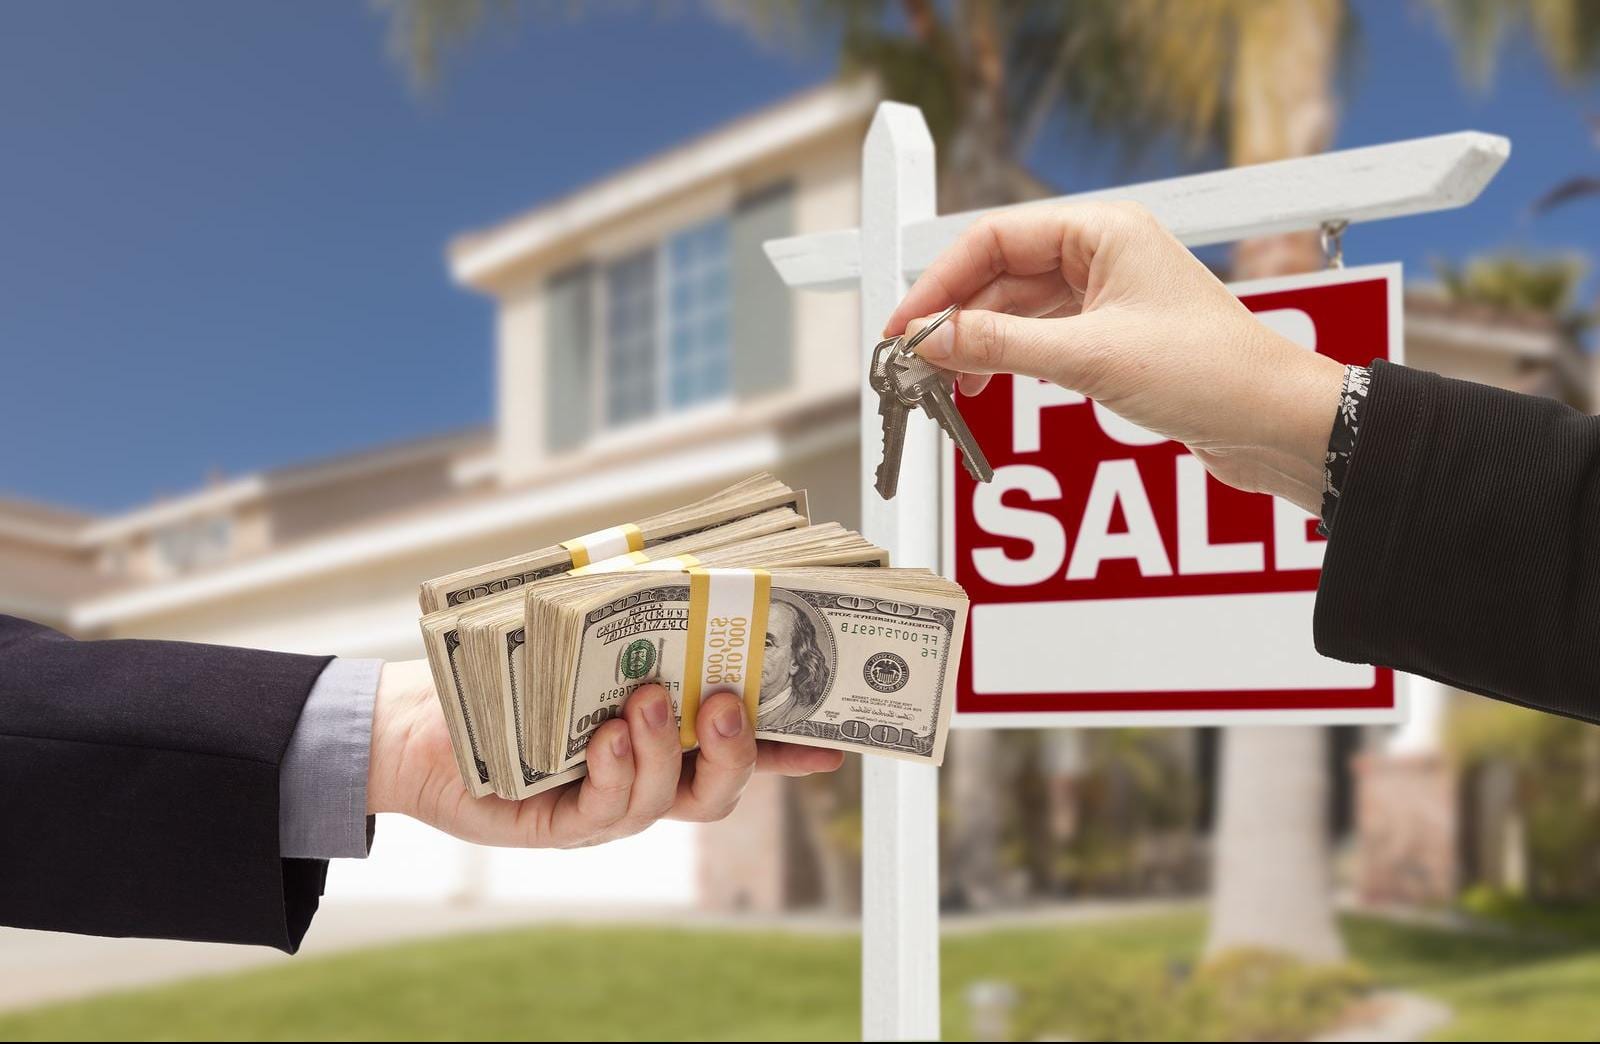 How to Get the Best Deals on Homes in Your Area